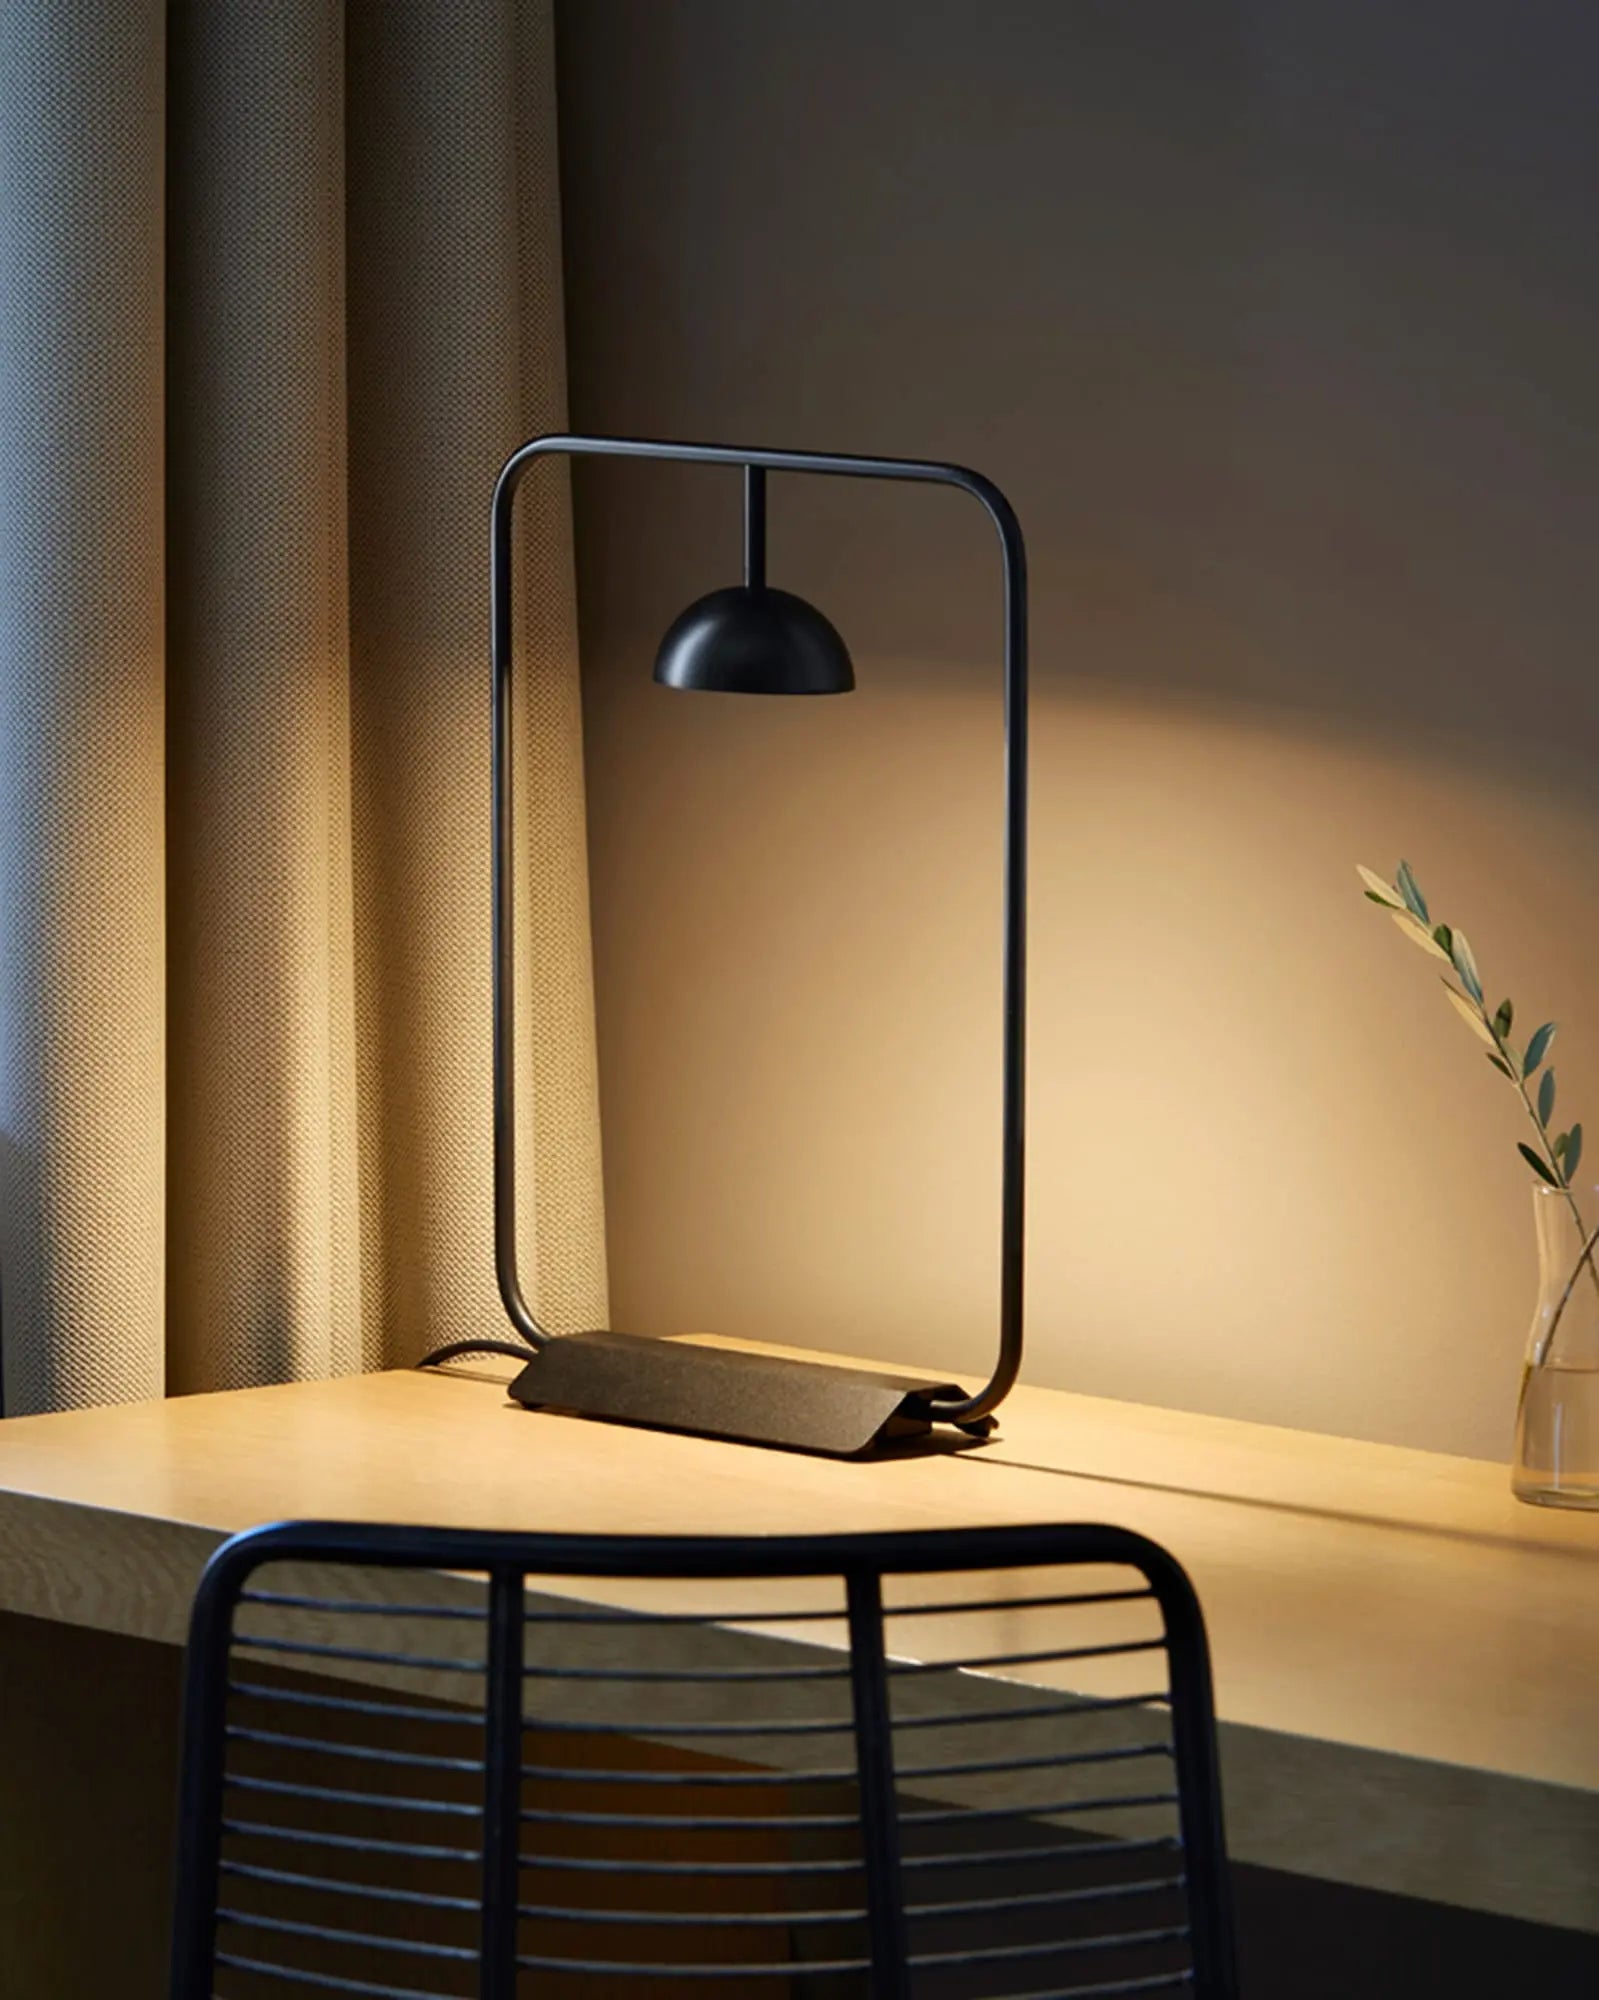 Cupolina Table Lamp on a desk